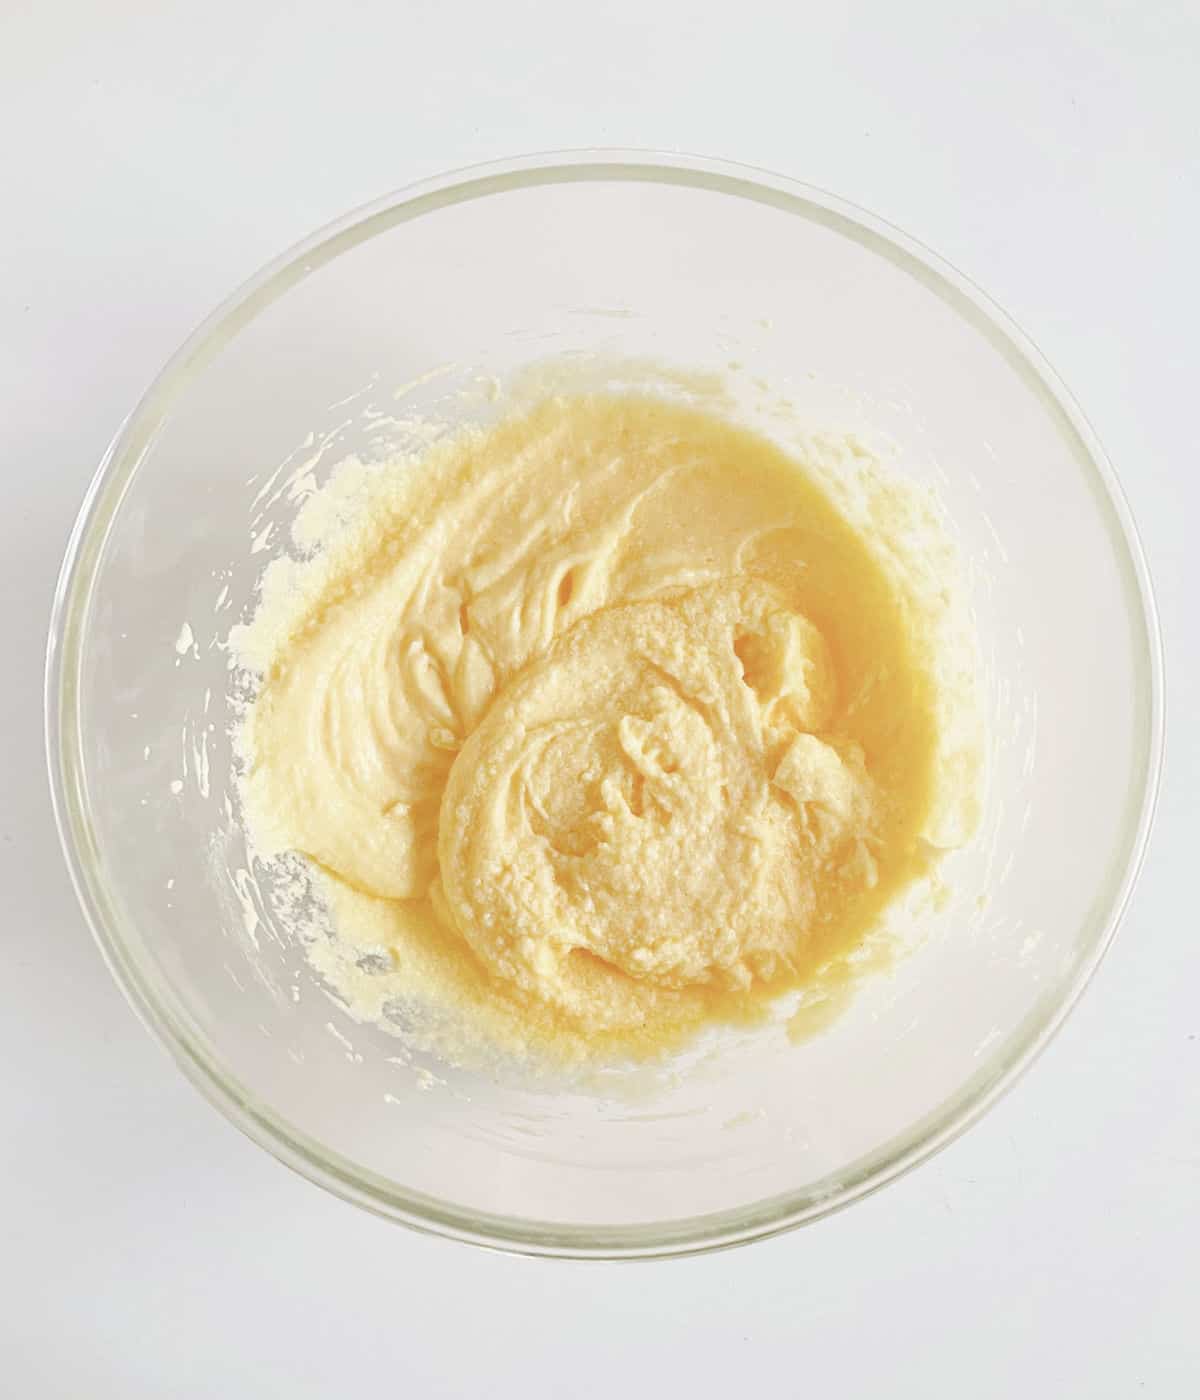 Creamed butter and sugar in glass bowl on a white surface.